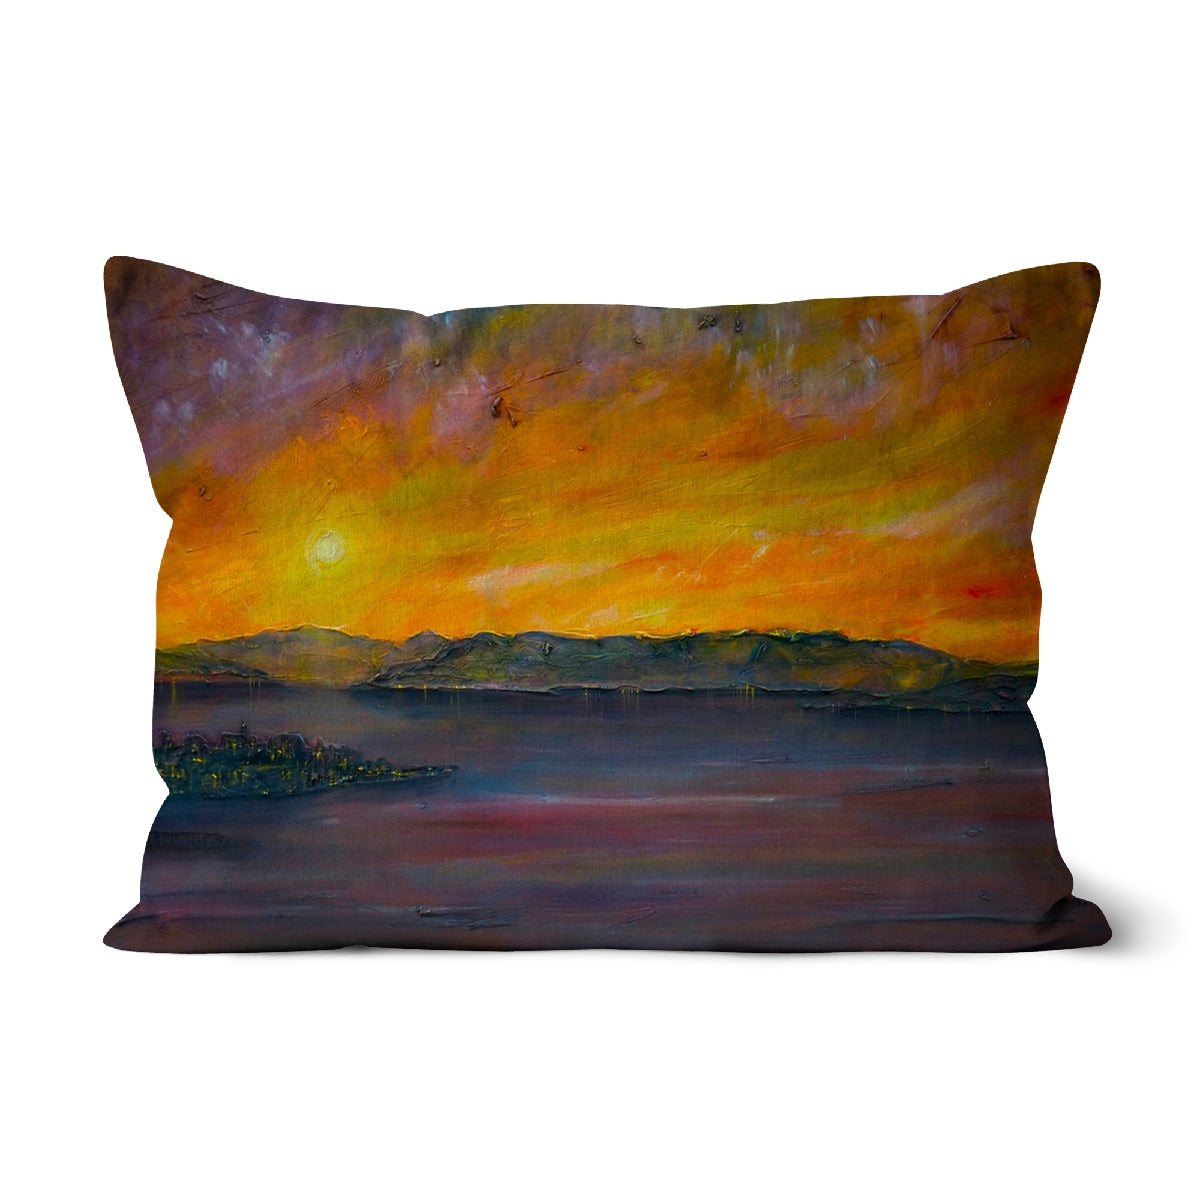 Sunset Over Gourock Art Gifts Cushion-Cushions-River Clyde Art Gallery-Canvas-19"x13"-Paintings, Prints, Homeware, Art Gifts From Scotland By Scottish Artist Kevin Hunter